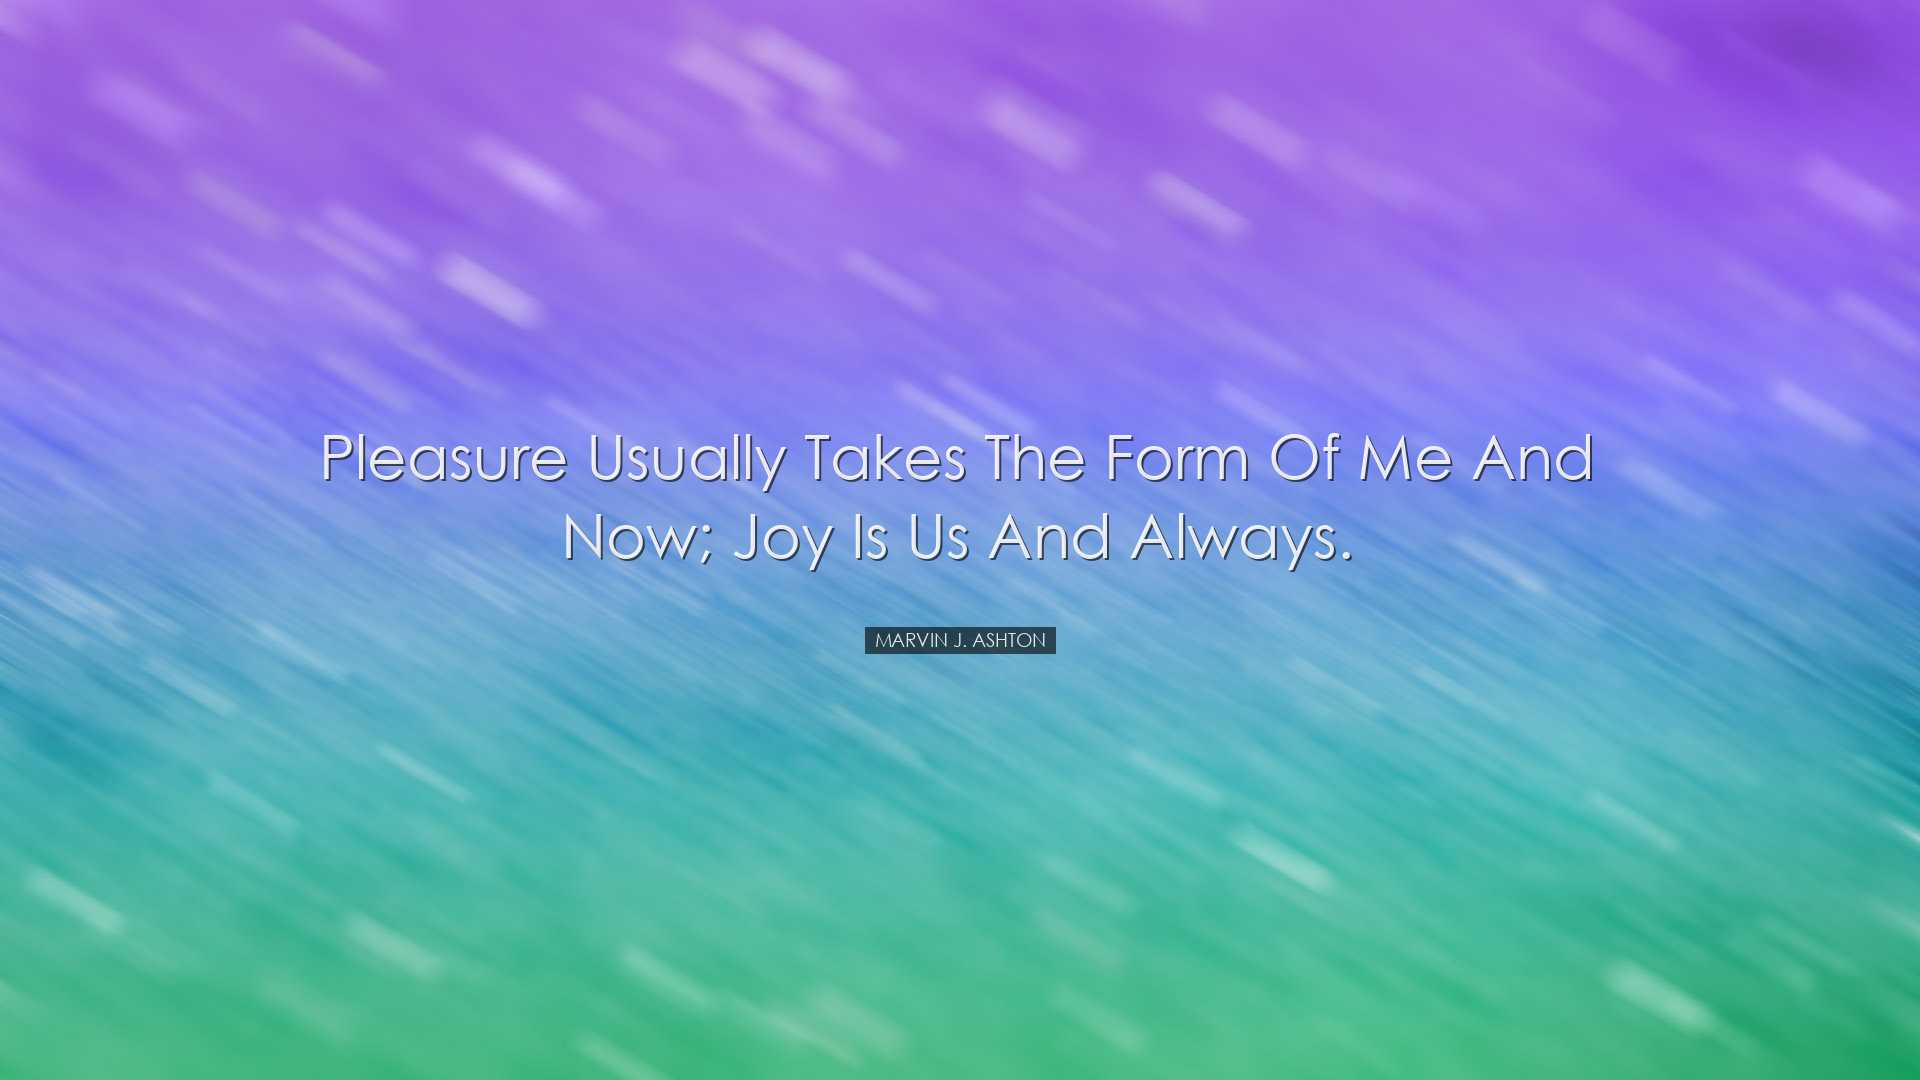 Pleasure usually takes the form of me and now; joy is us and alway